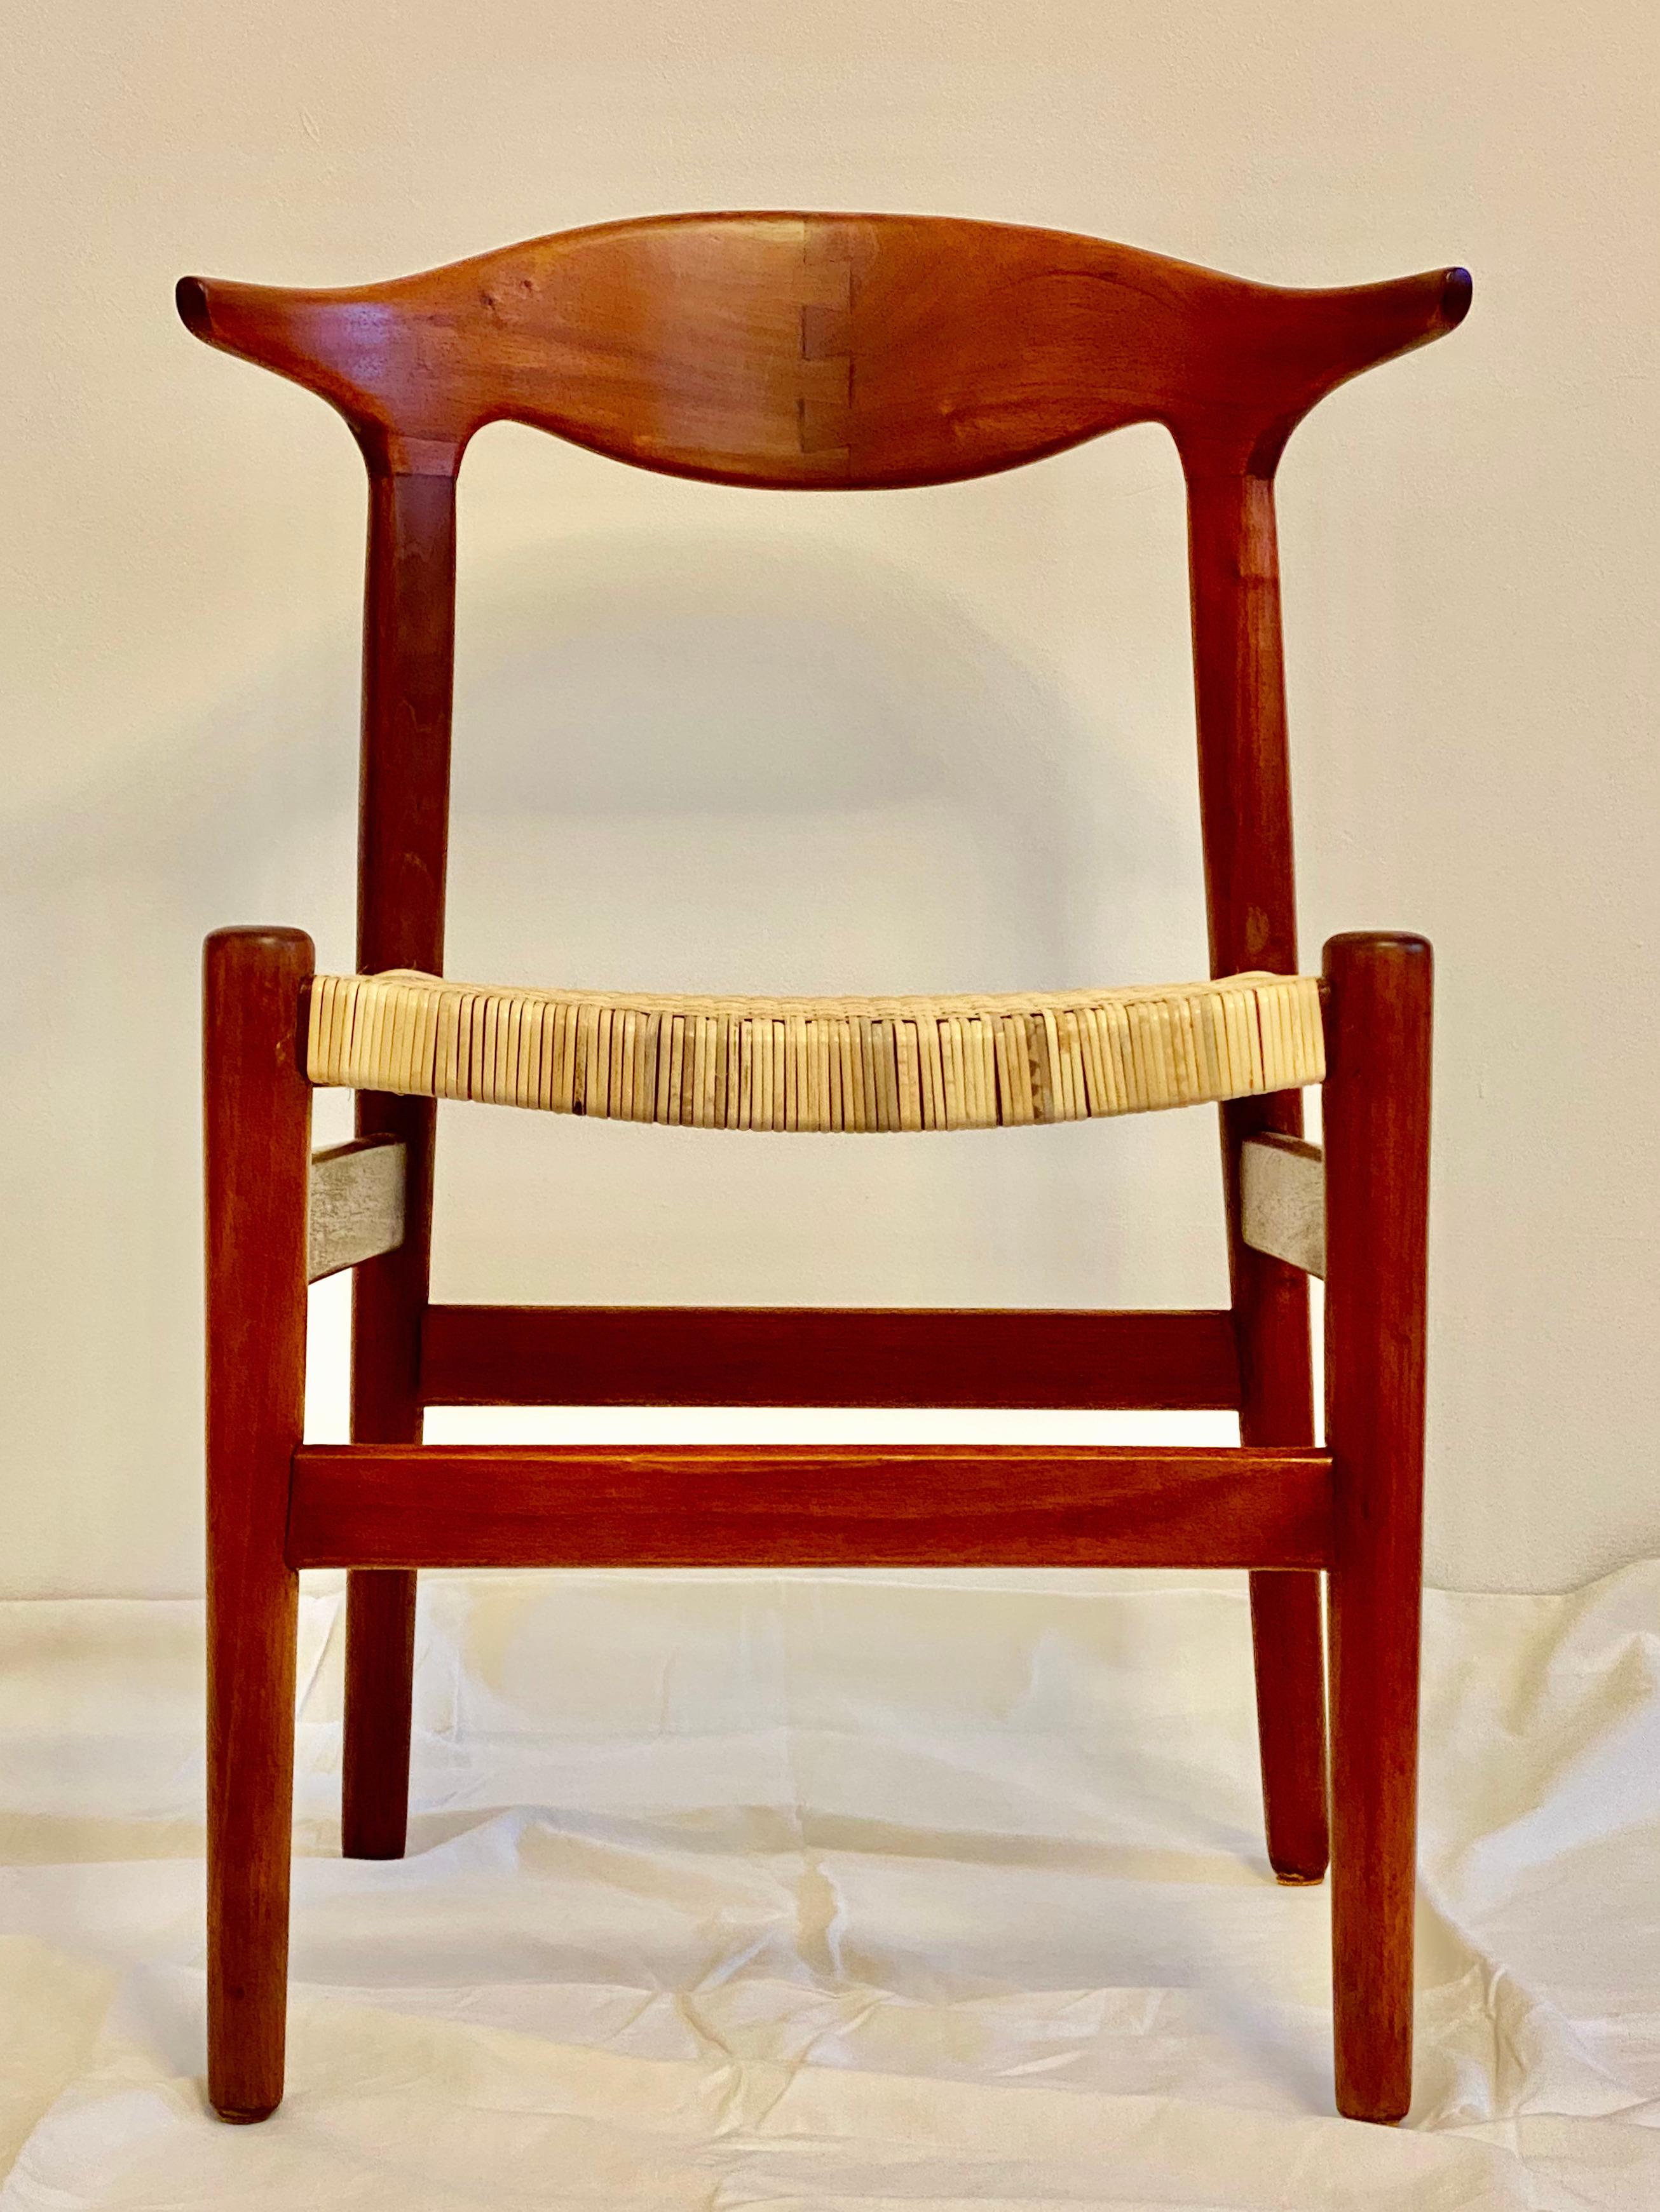 Mid-20th Century Scandinavian Modern Cow Horn Chair Attributed to Hans Wegner For Sale